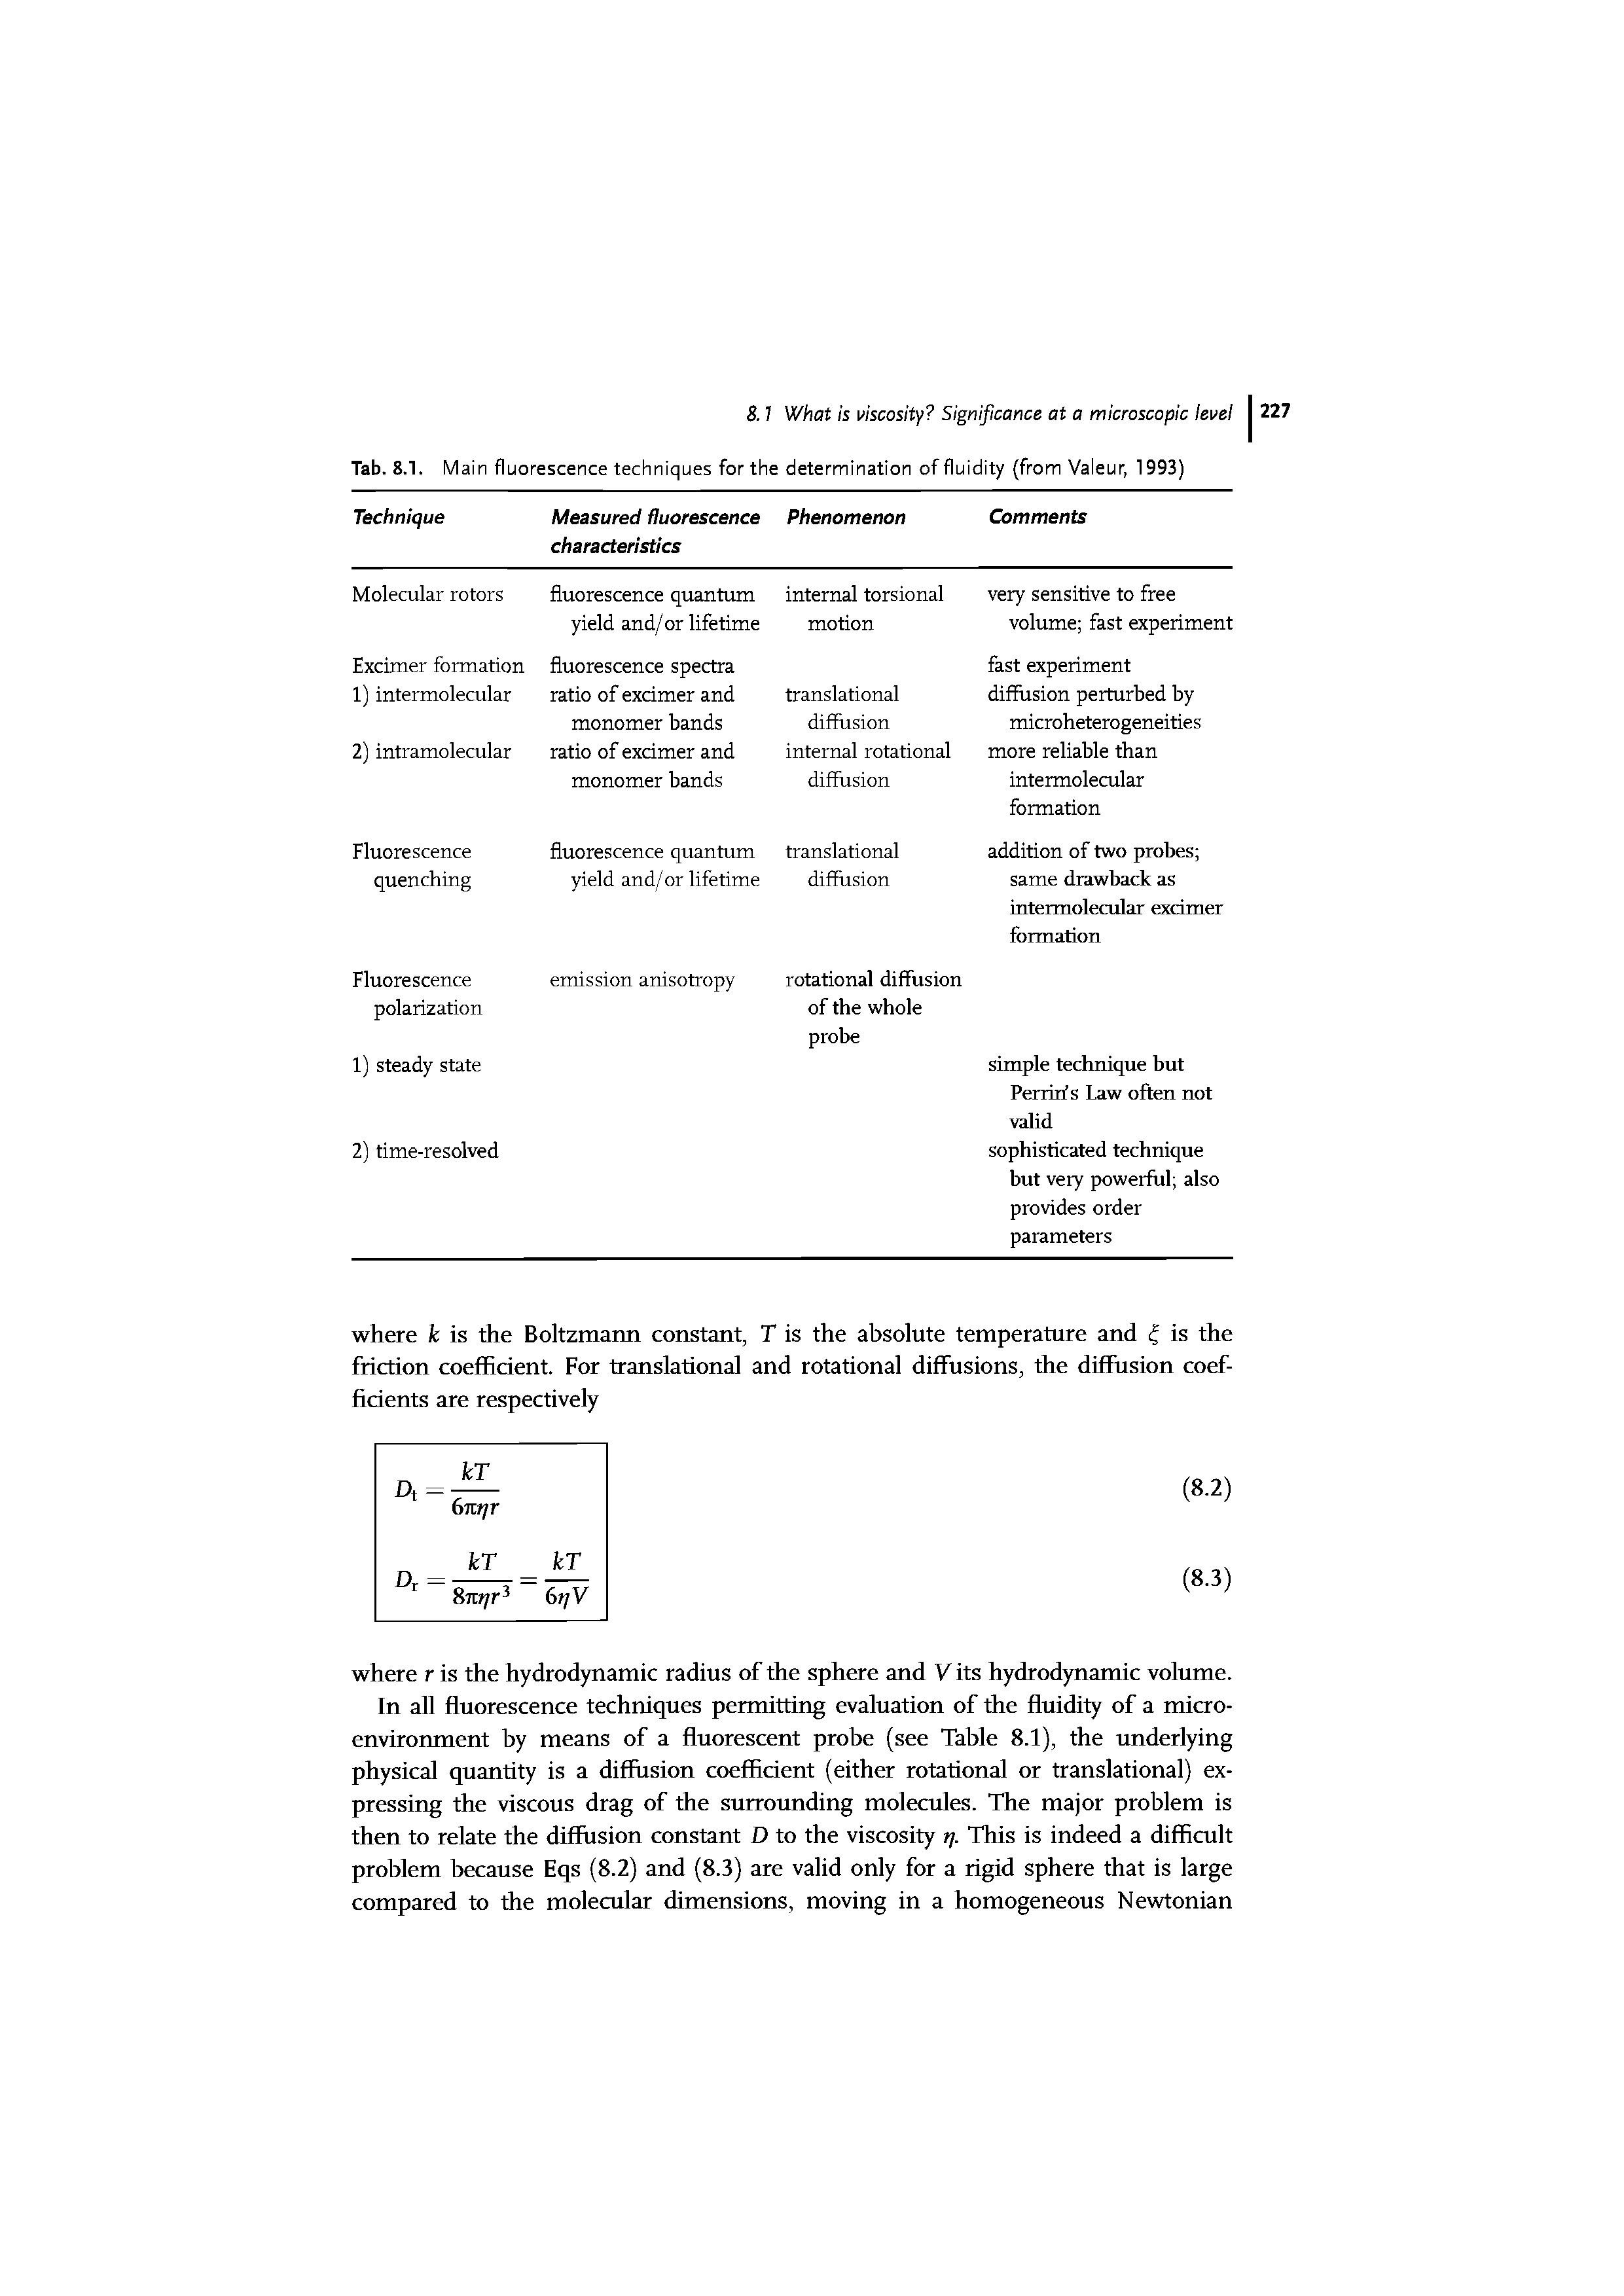 Tab. 8.1. Main fluorescence techniques for the determination of fluidity (from Valeur, 1993)...